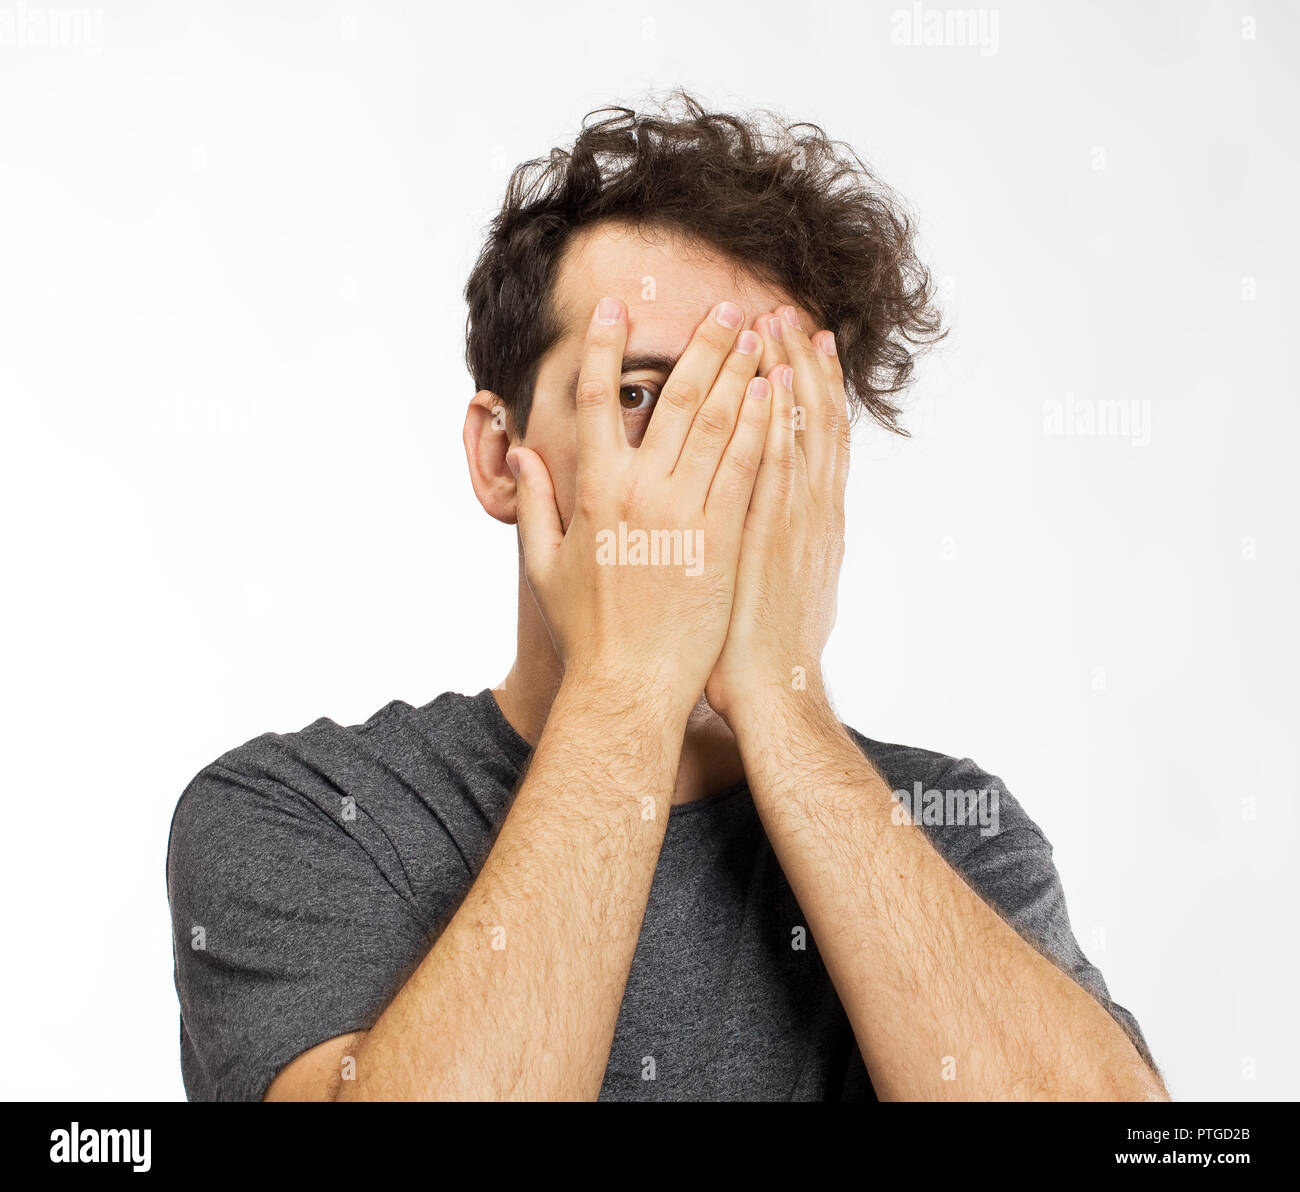 Young man blocking face with hands Stock Photo